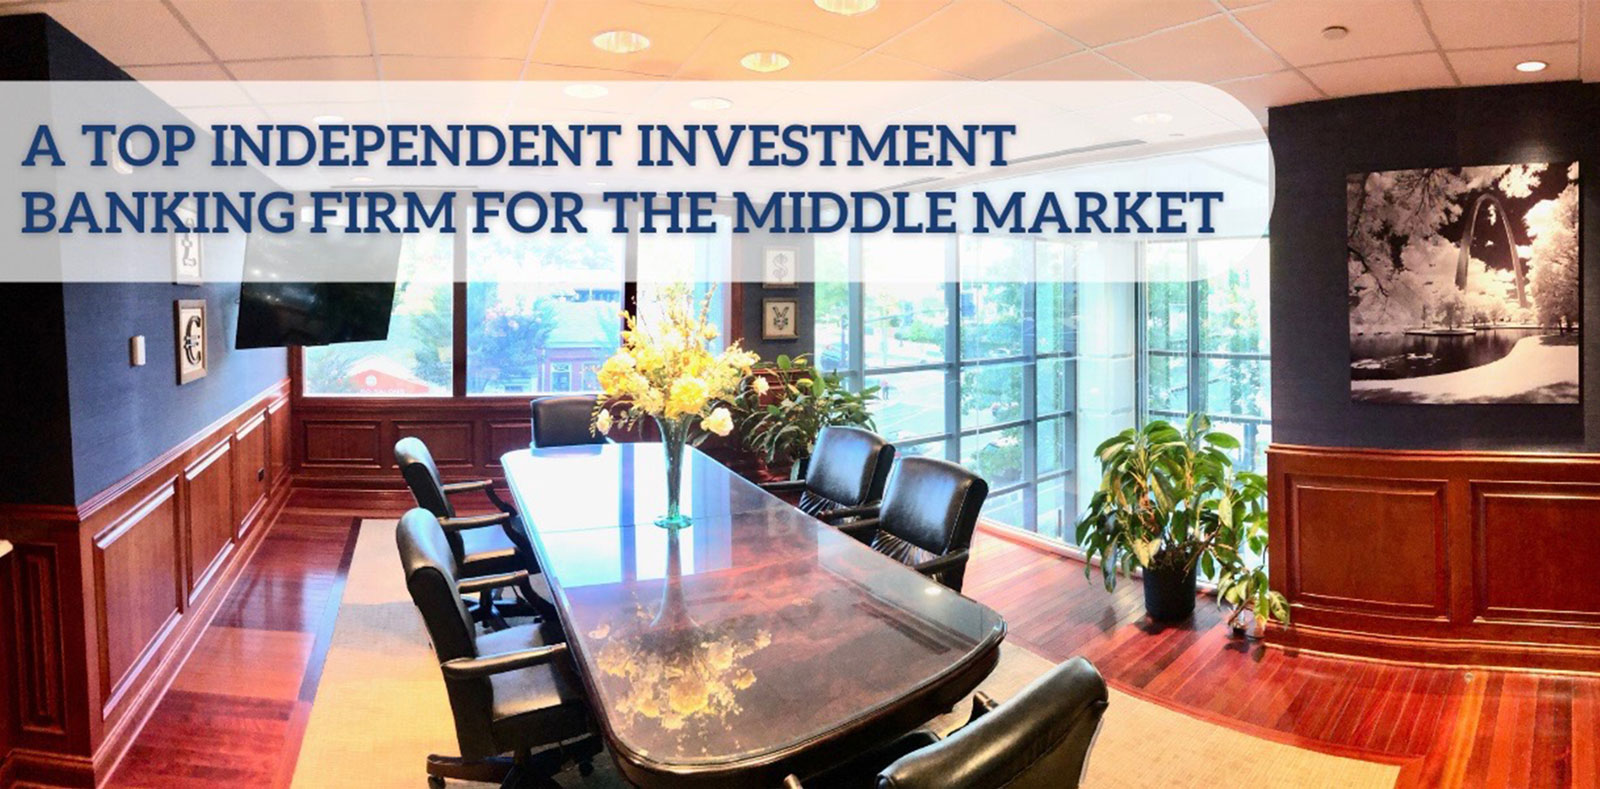 CCP is a top indepnedent investment banking firm for the Middle Market